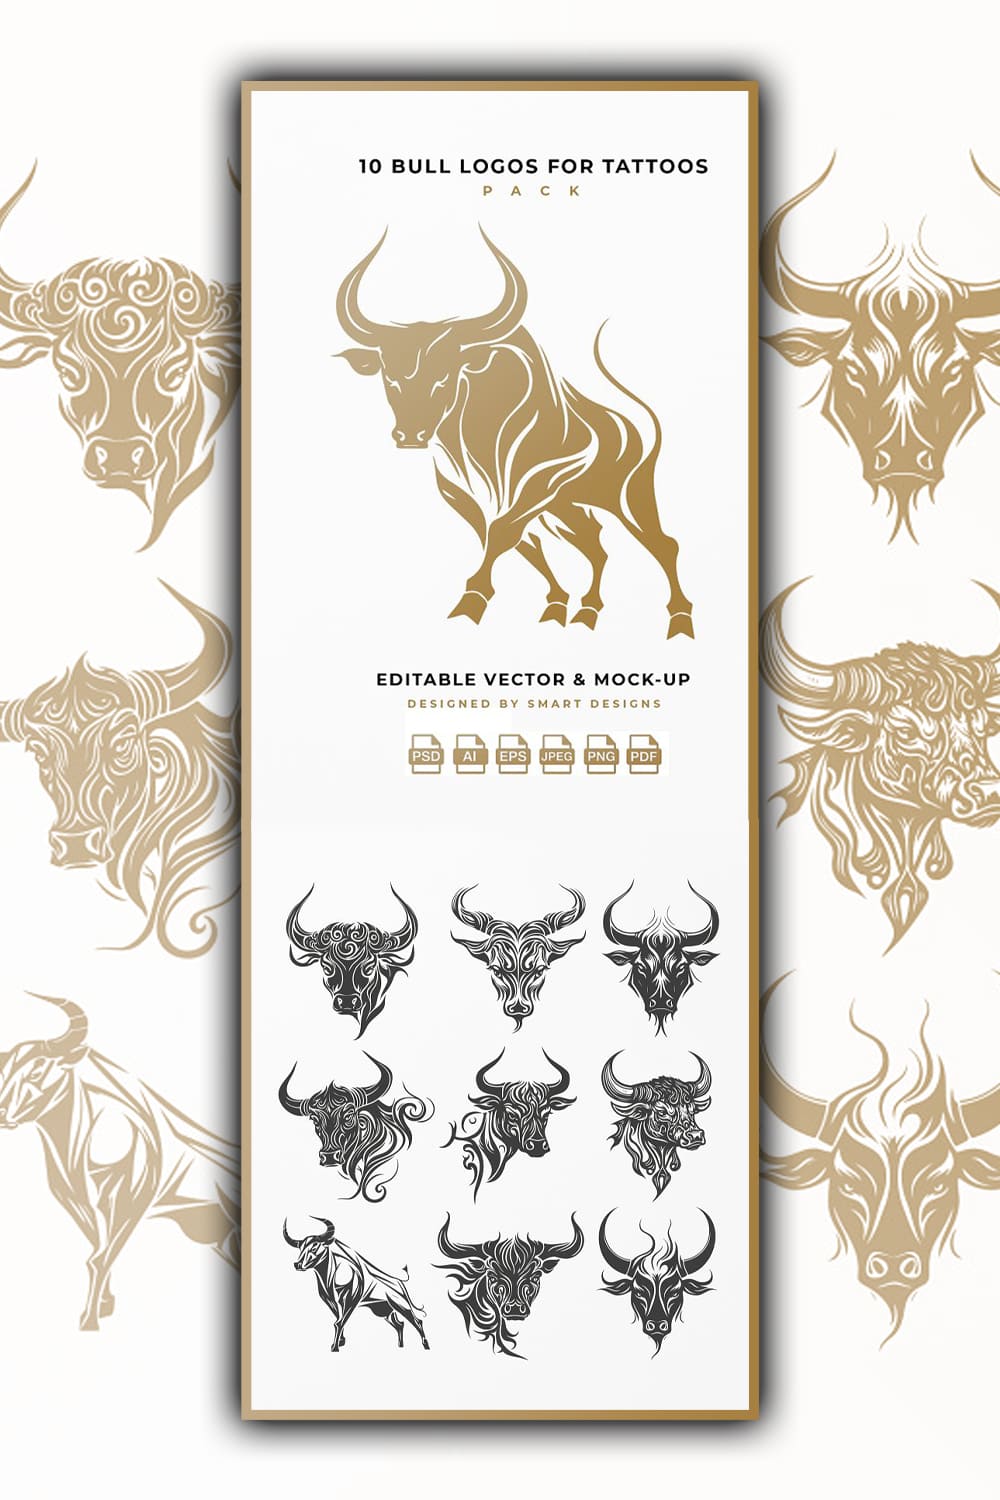 Black and beige bull logos designed by Smart Designs.